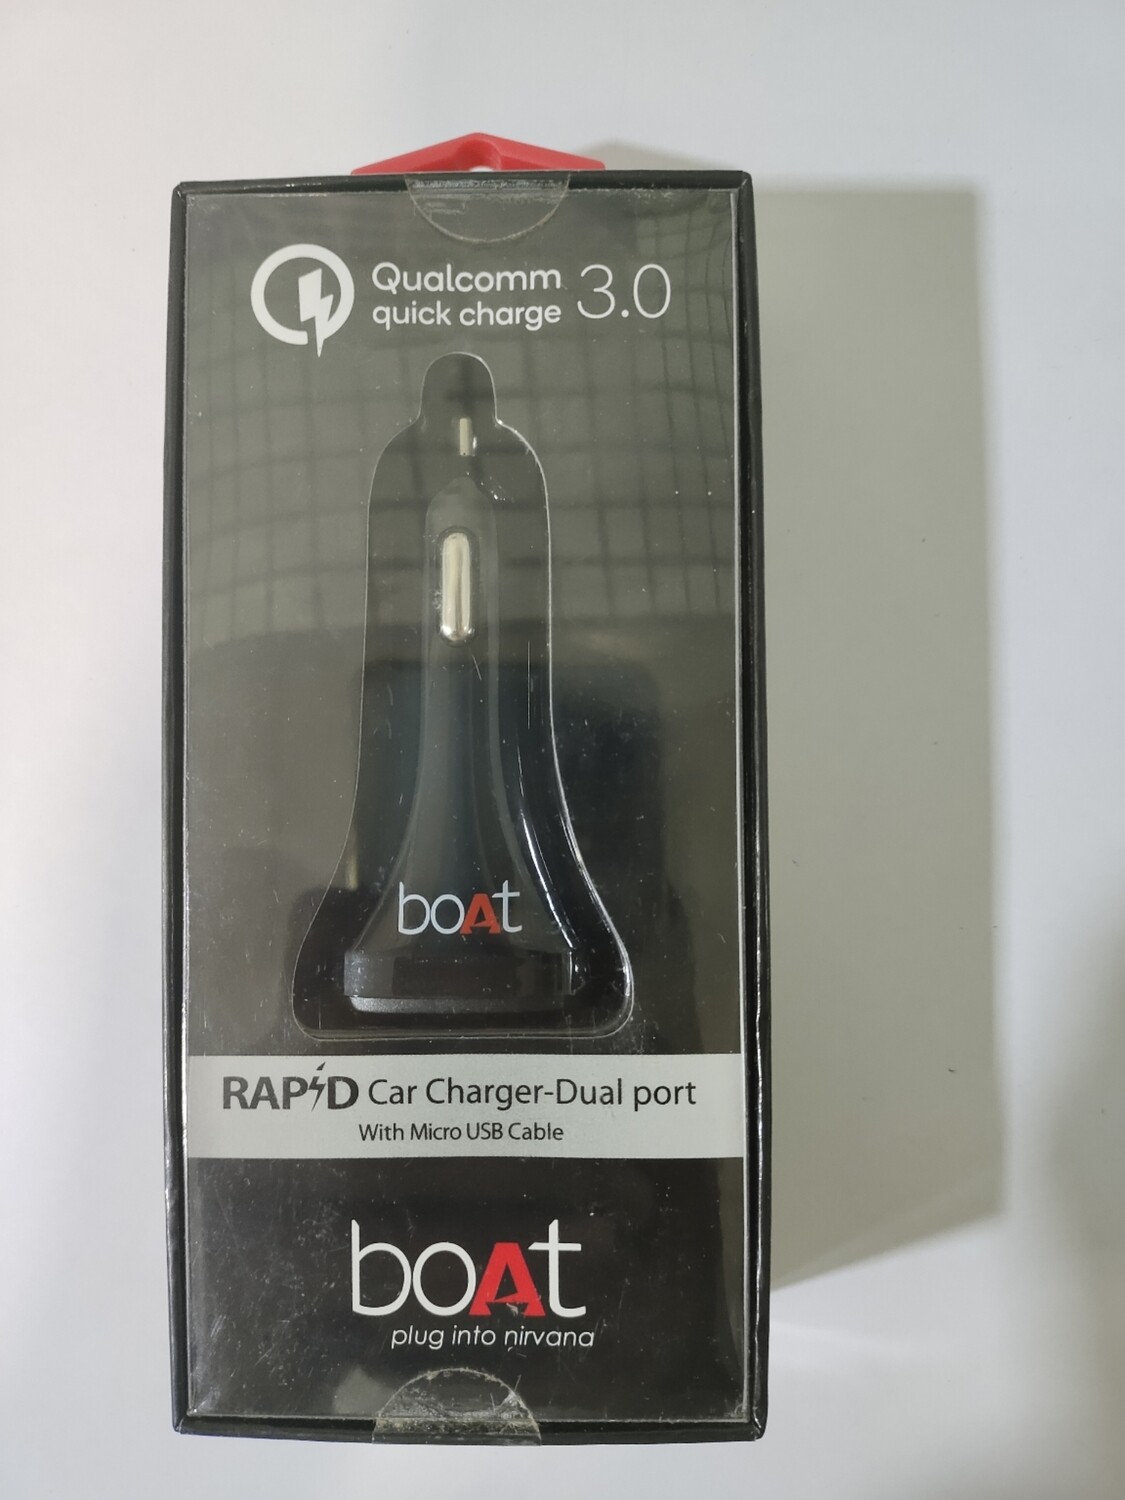 boAt Dual Port Rapid 5V Car Charger (Qualcomm Certified) Smart Charging  with Quick Charge 3.0 for Cellular Phones (Black) (Free Micro USB Cable) :  : Electronics